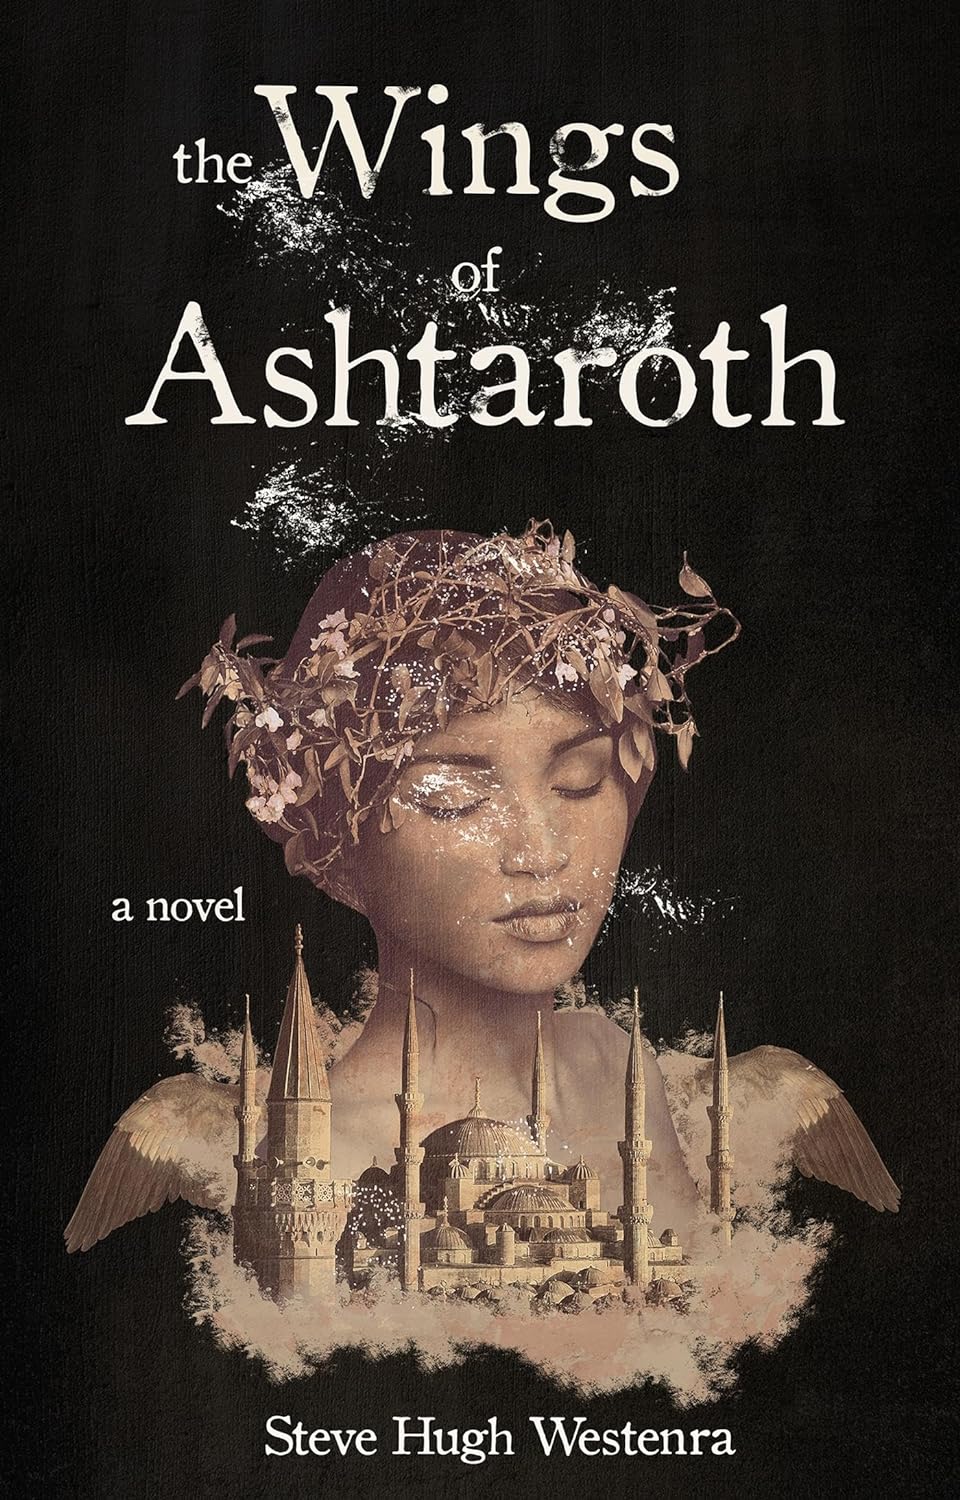 The cover of "The Wings of Ashtaroth", by Steve Hugh Westenra. It depicts a city with domed roofs and tall towers seemingly sculpted out of sand, with a giant winged person's torso and head behind it. The person in question has feathered wings, delicate features, and wears a crown of branches and dried leaves and flowers. The title is at the top, in big white letters, while the author's name is at the bottom in a smaller font. on the left side, there's a caption with the words "a novel".